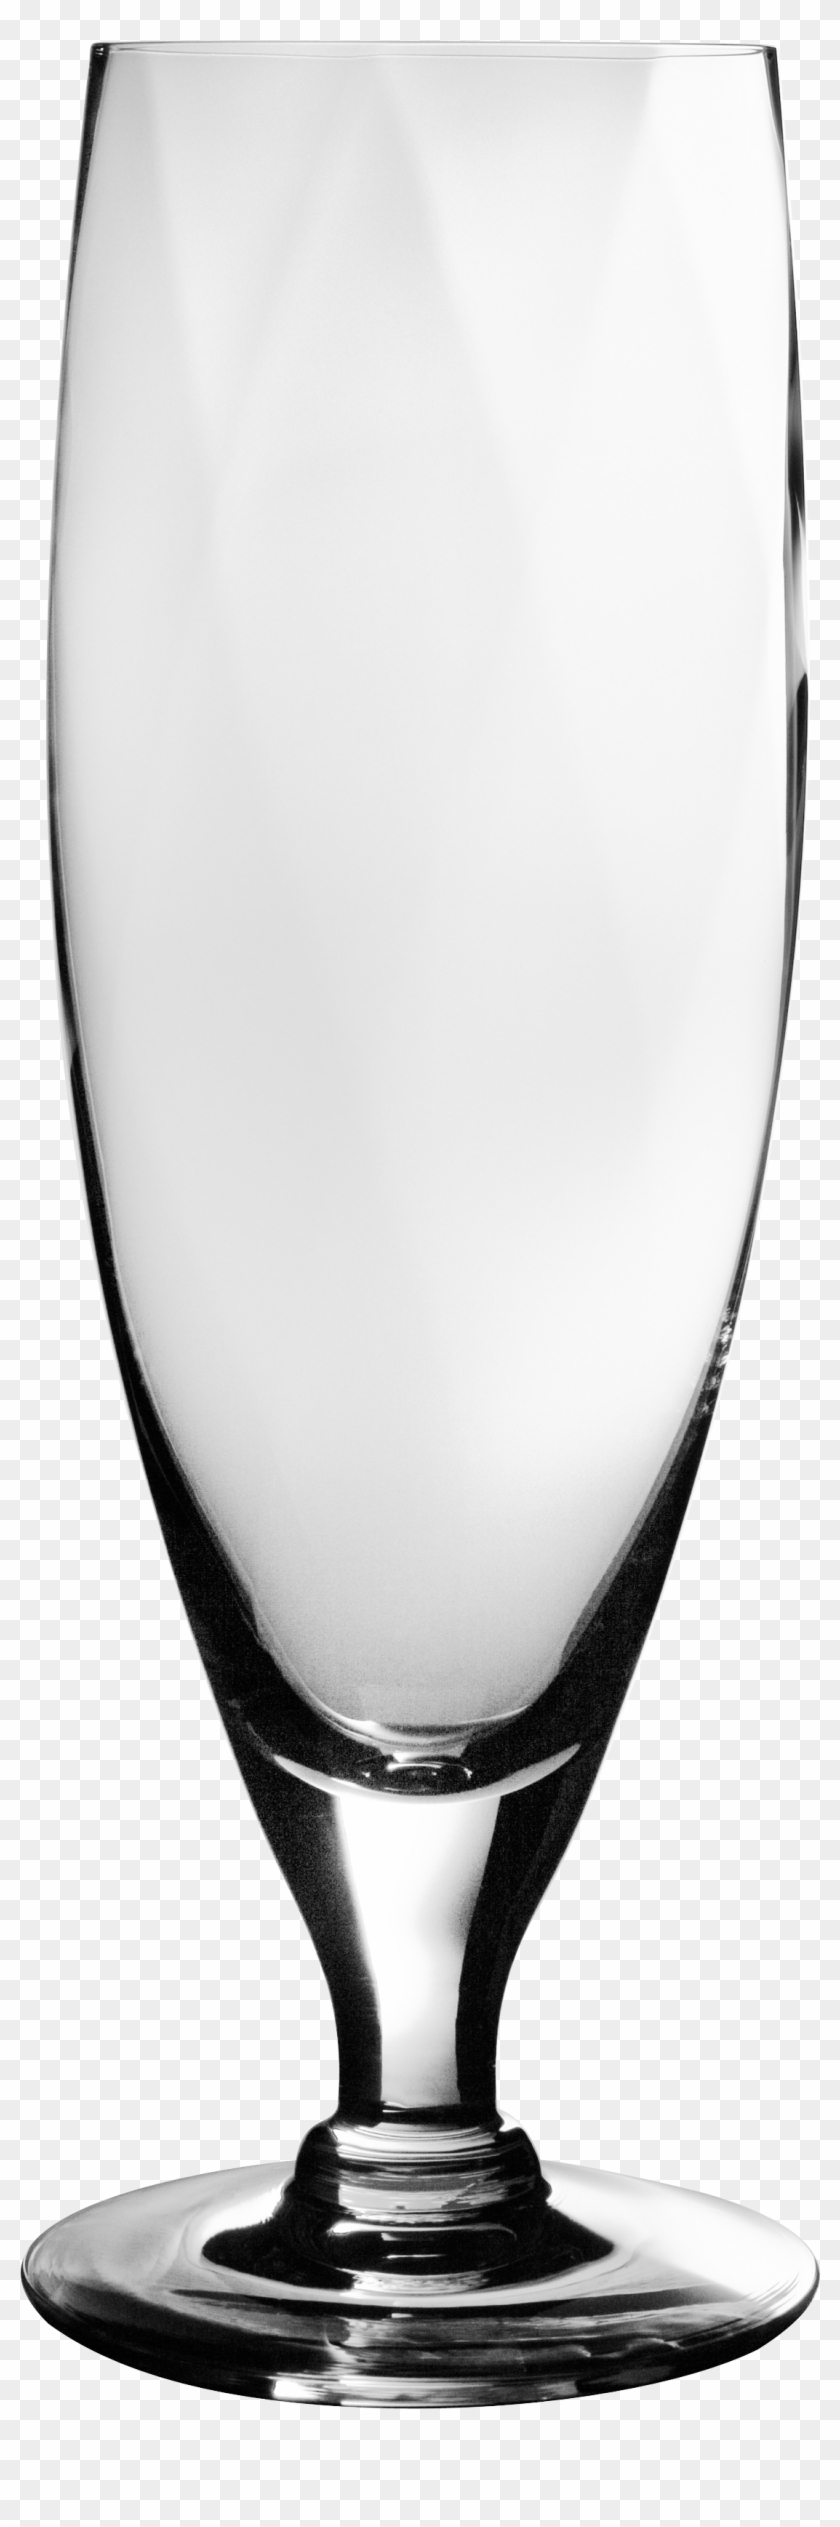 Empty Wine Glass Png Image - Empty Glass Png #740883